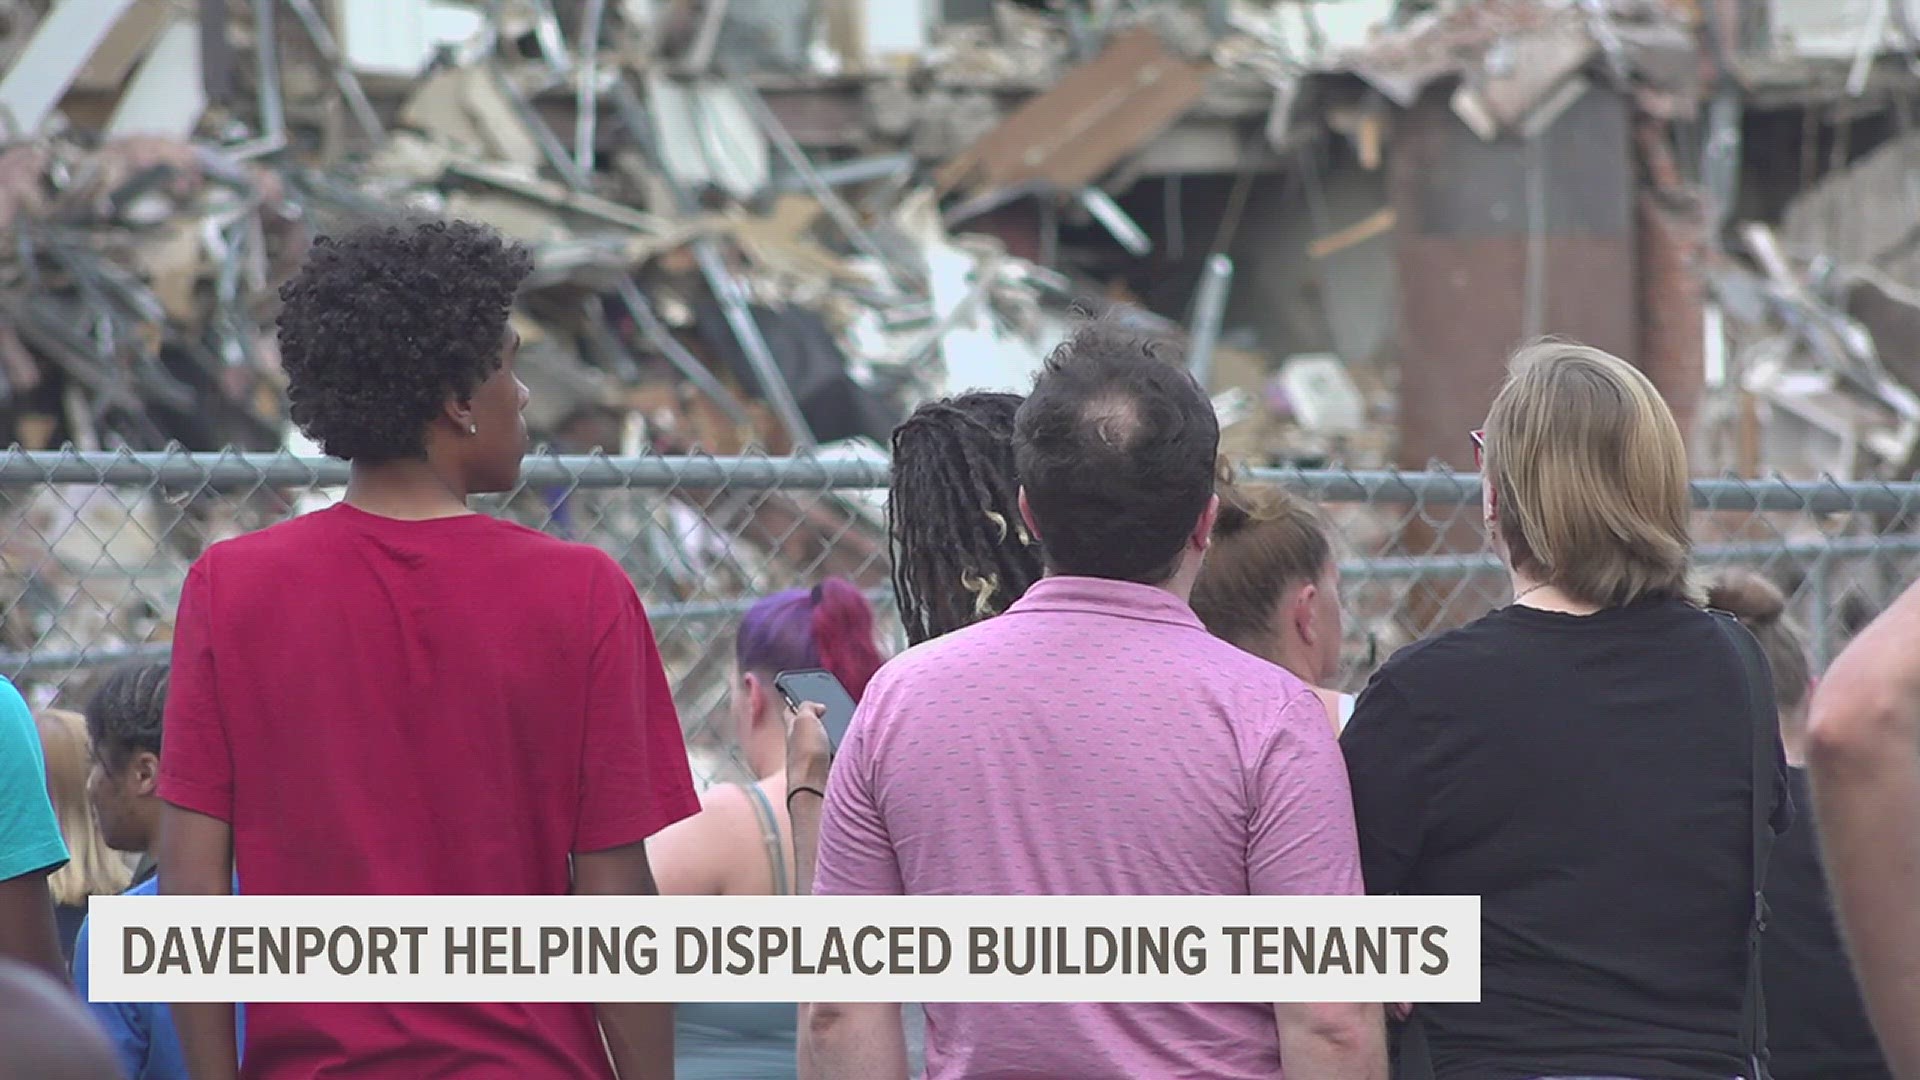 $6,000 will be available for each household that lived in the downtown building that partially collapsed.